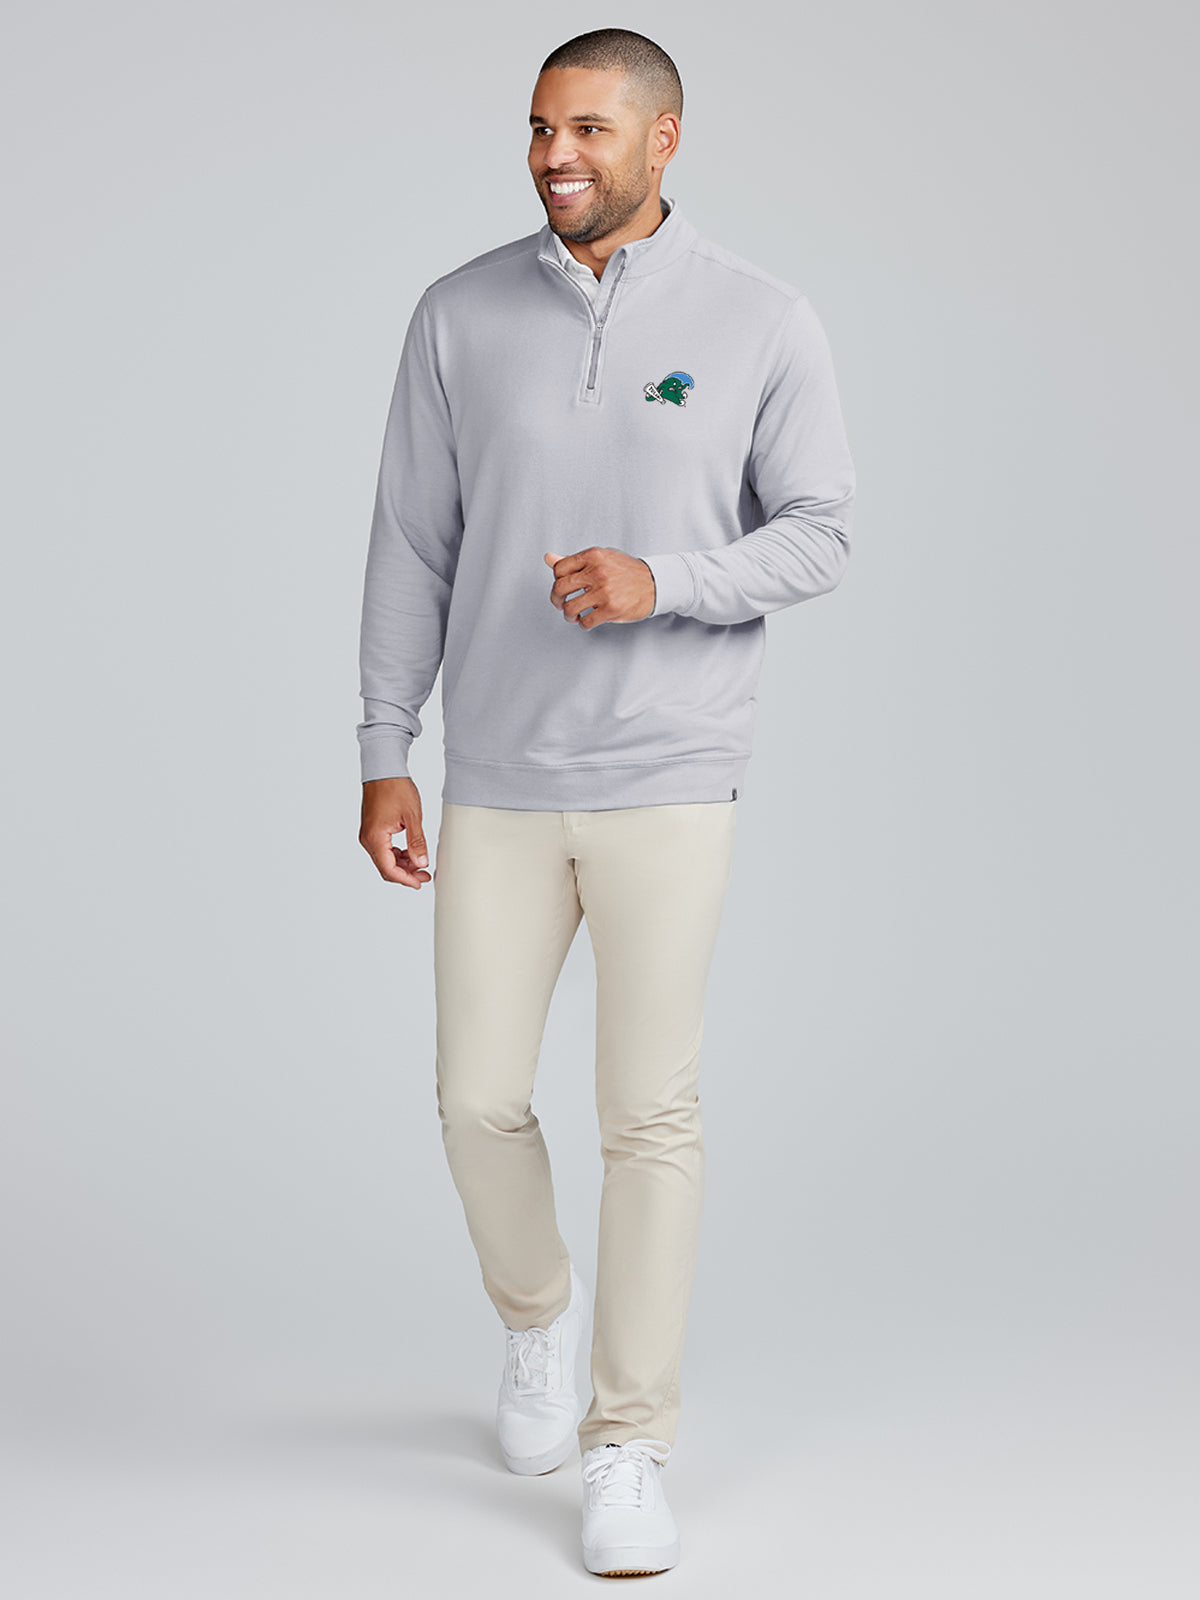 Cloud French Terry Quarter Zip - Tulane- tasc Performance (Alloy)